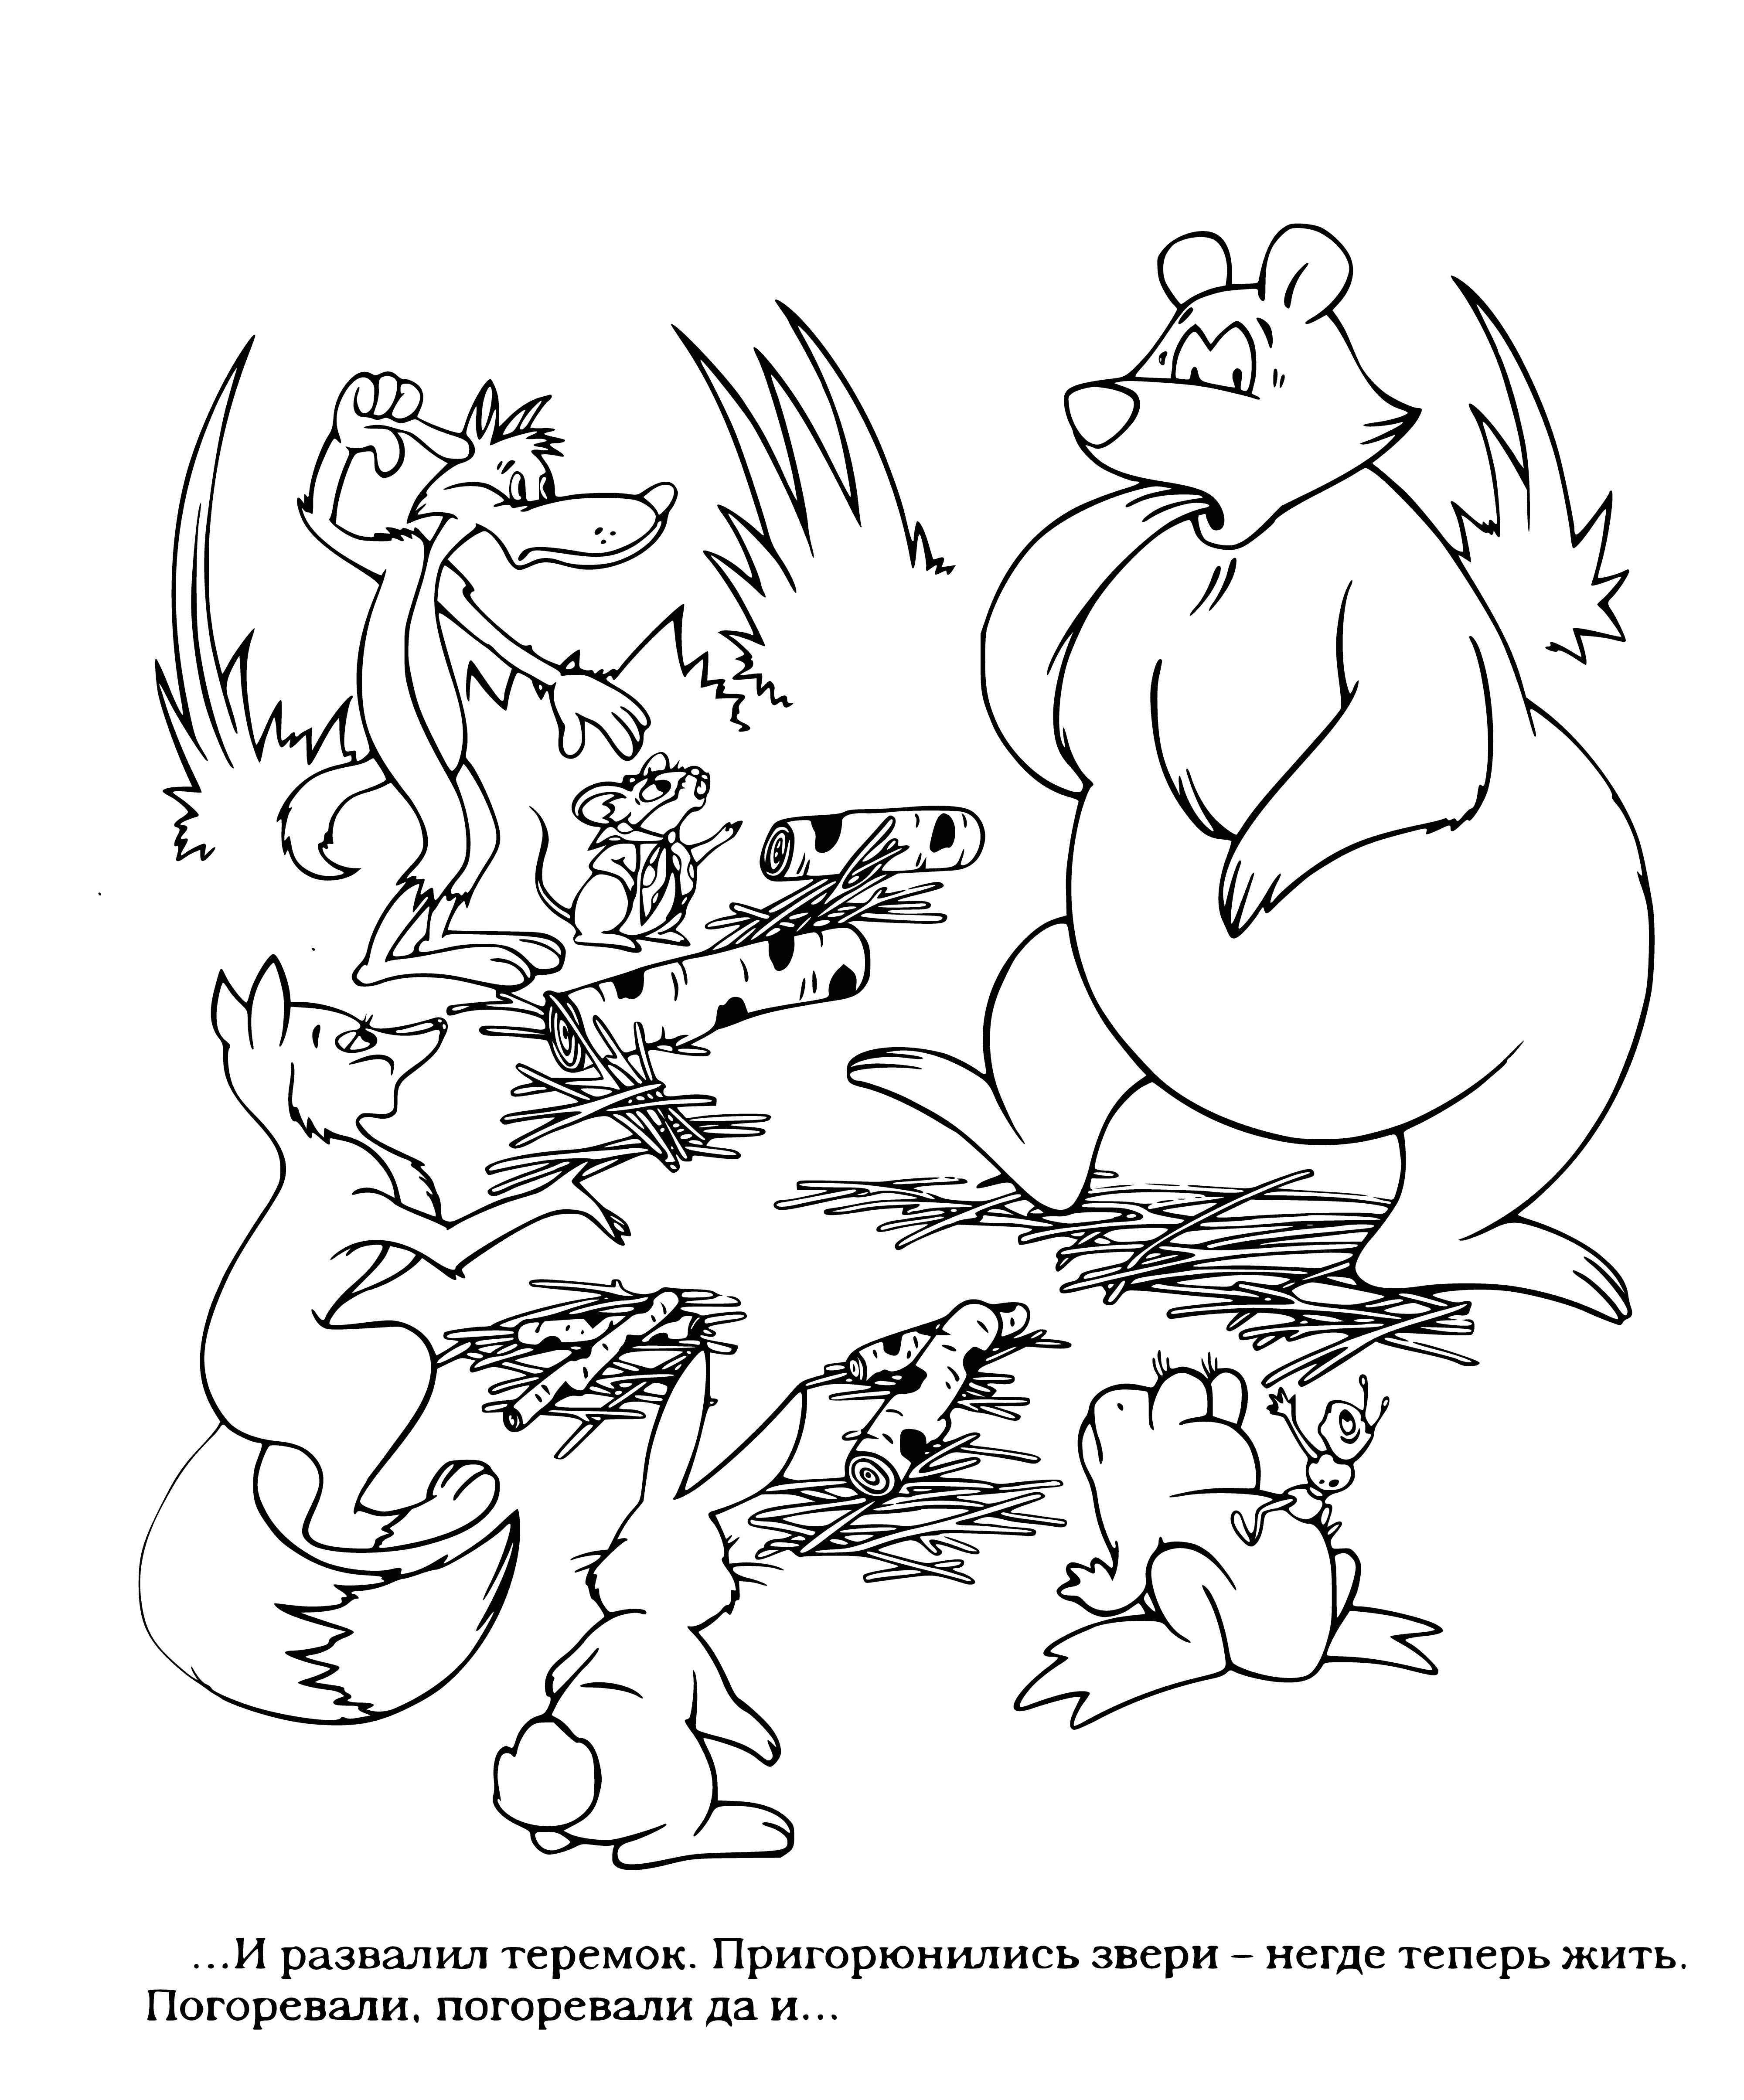 coloring page: Two farmers find a teremok, which appears unstable. One farmer jumps up and down and it falls over, proving him right.